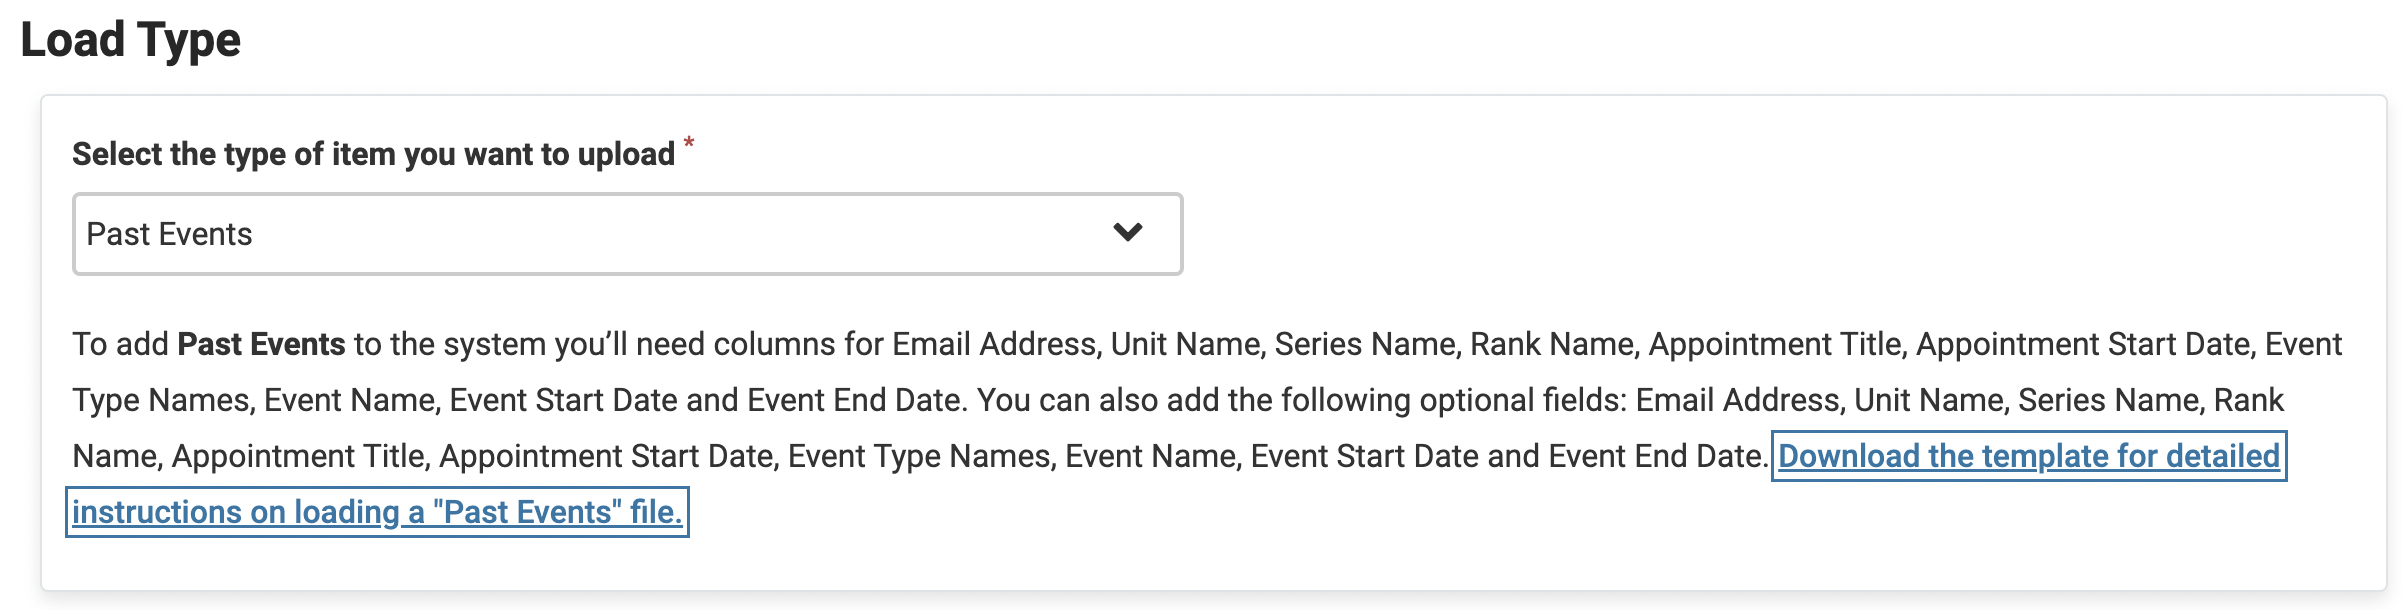 Load Type section with Past Events selected and the Download the template for detailed instructions on loading a "Past Events" file link selected